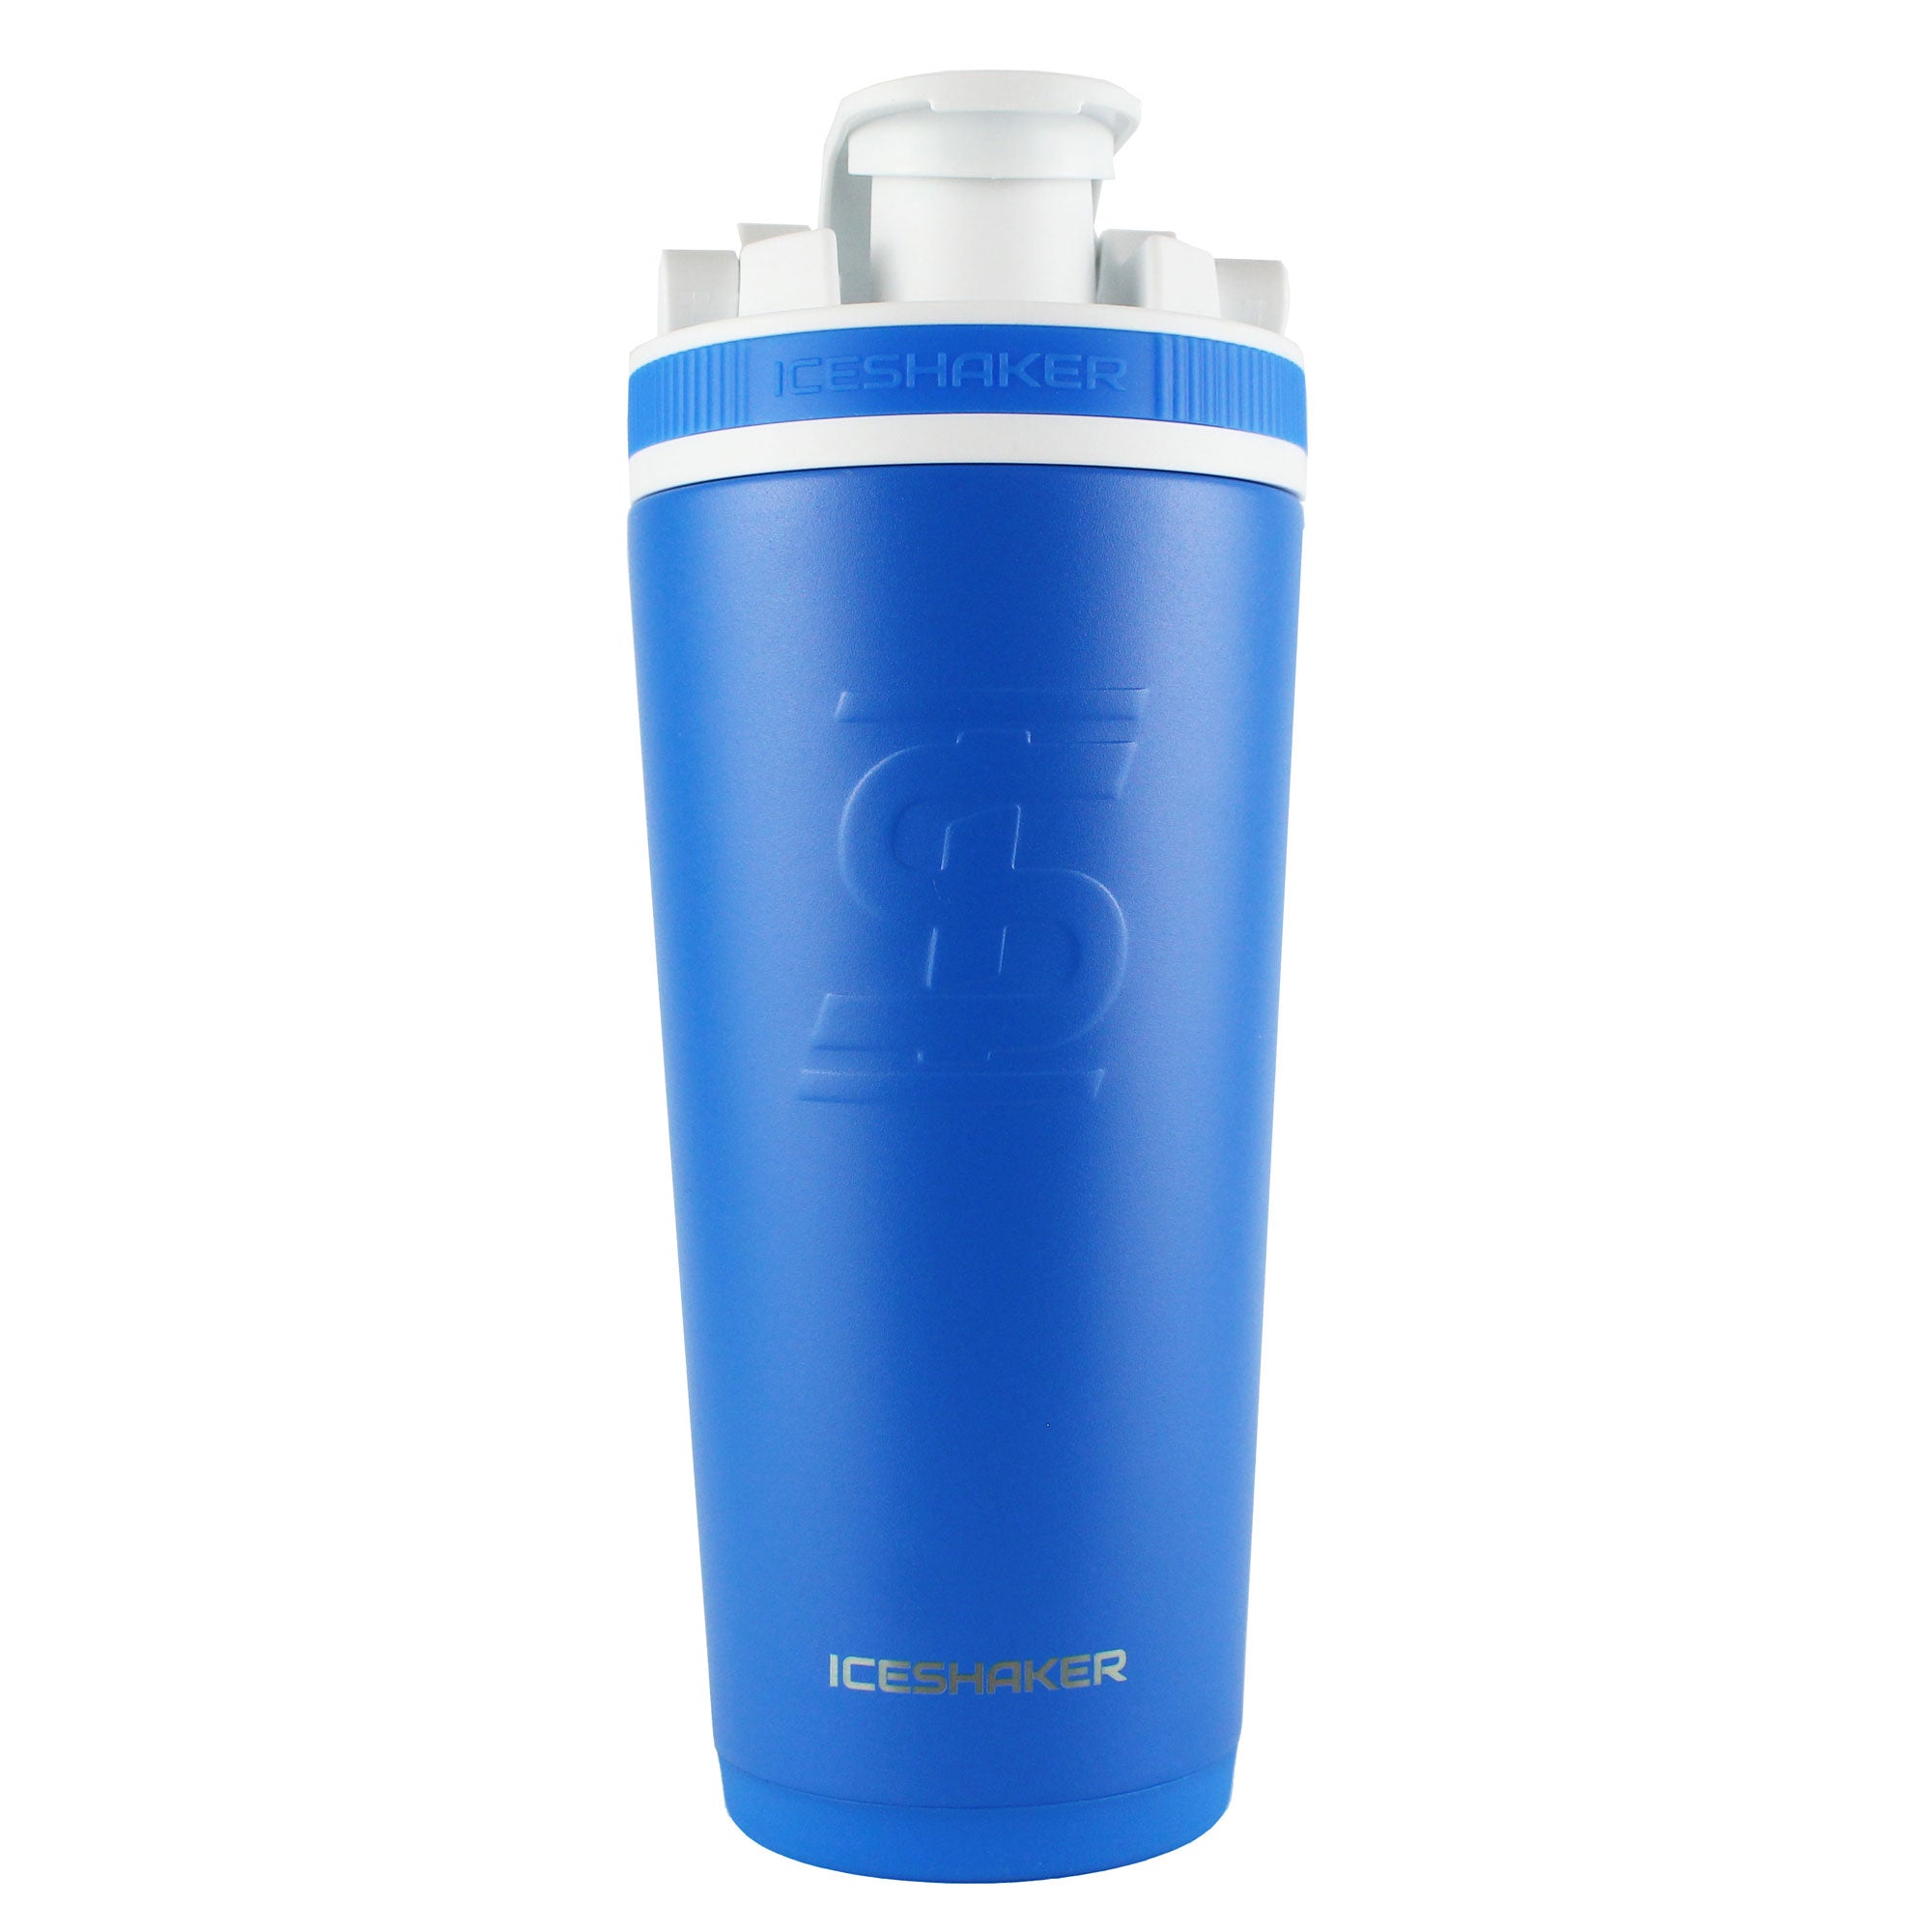 Officially Licensed New York Mets 26oz Ice Shaker - Royal Blue